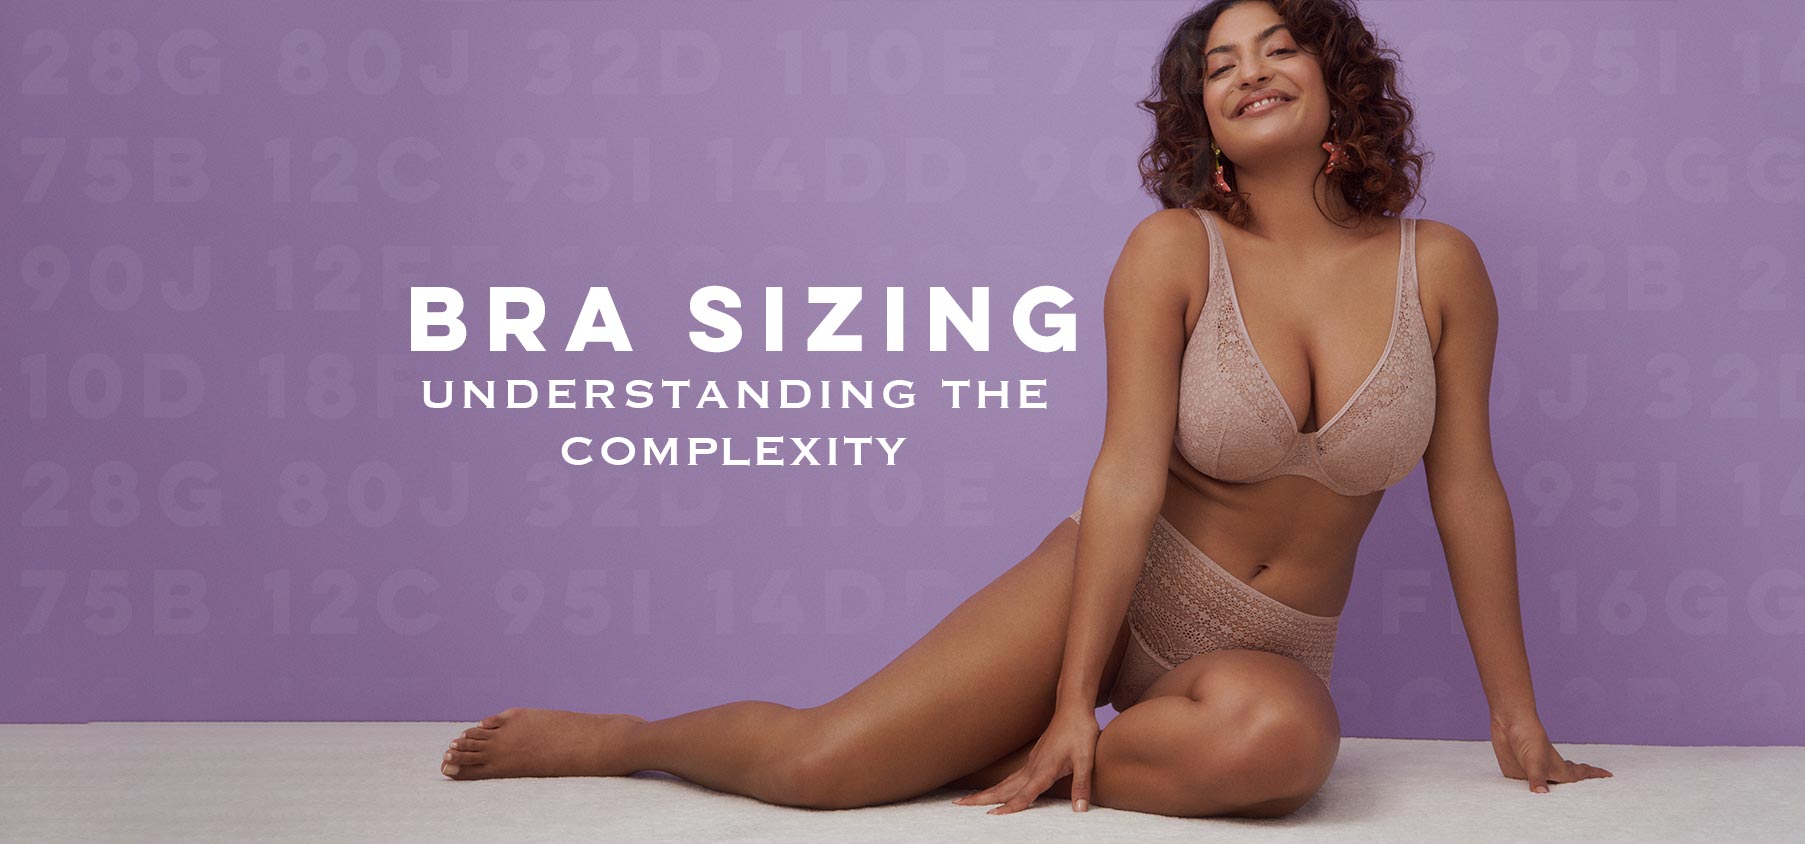 Woman sitting on floor in lingerie with Bra Sizing in the background